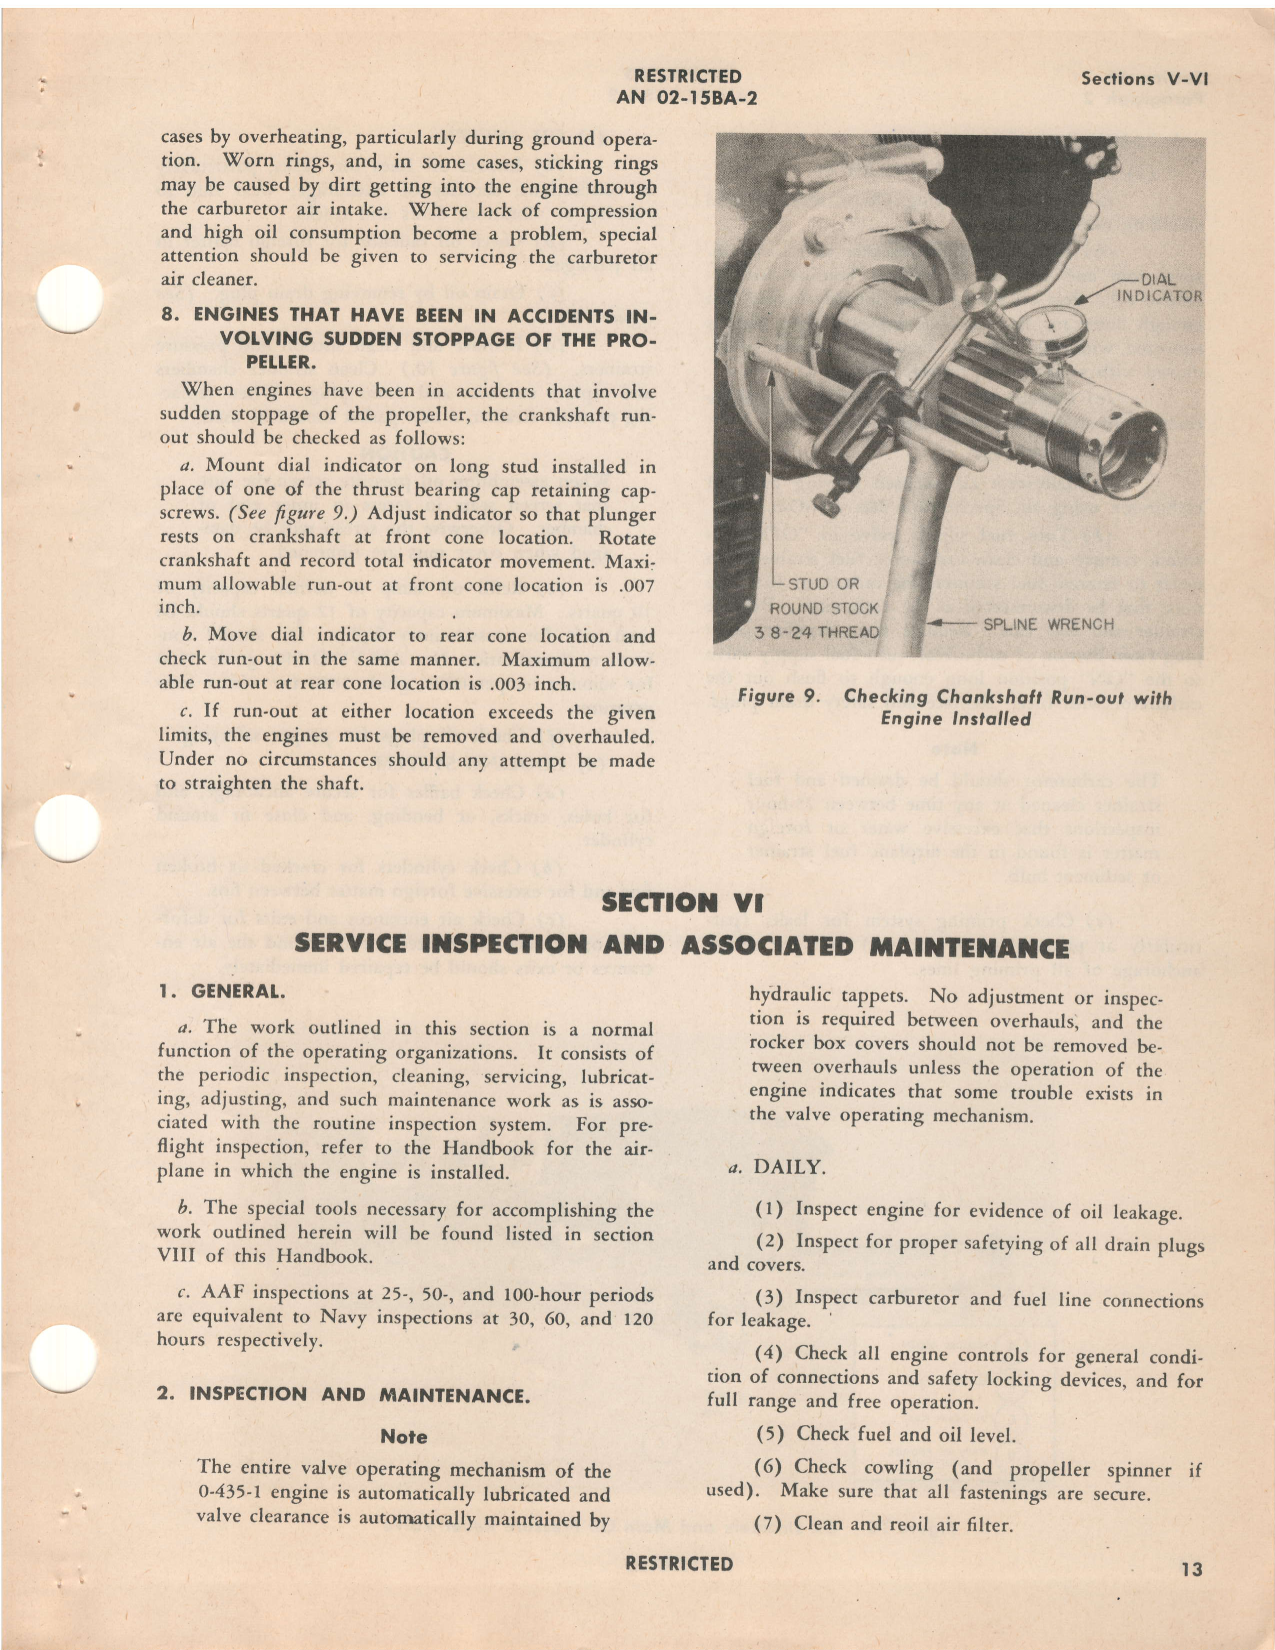 Sample page 19 from AirCorps Library document: Service Instructions - O-435-1